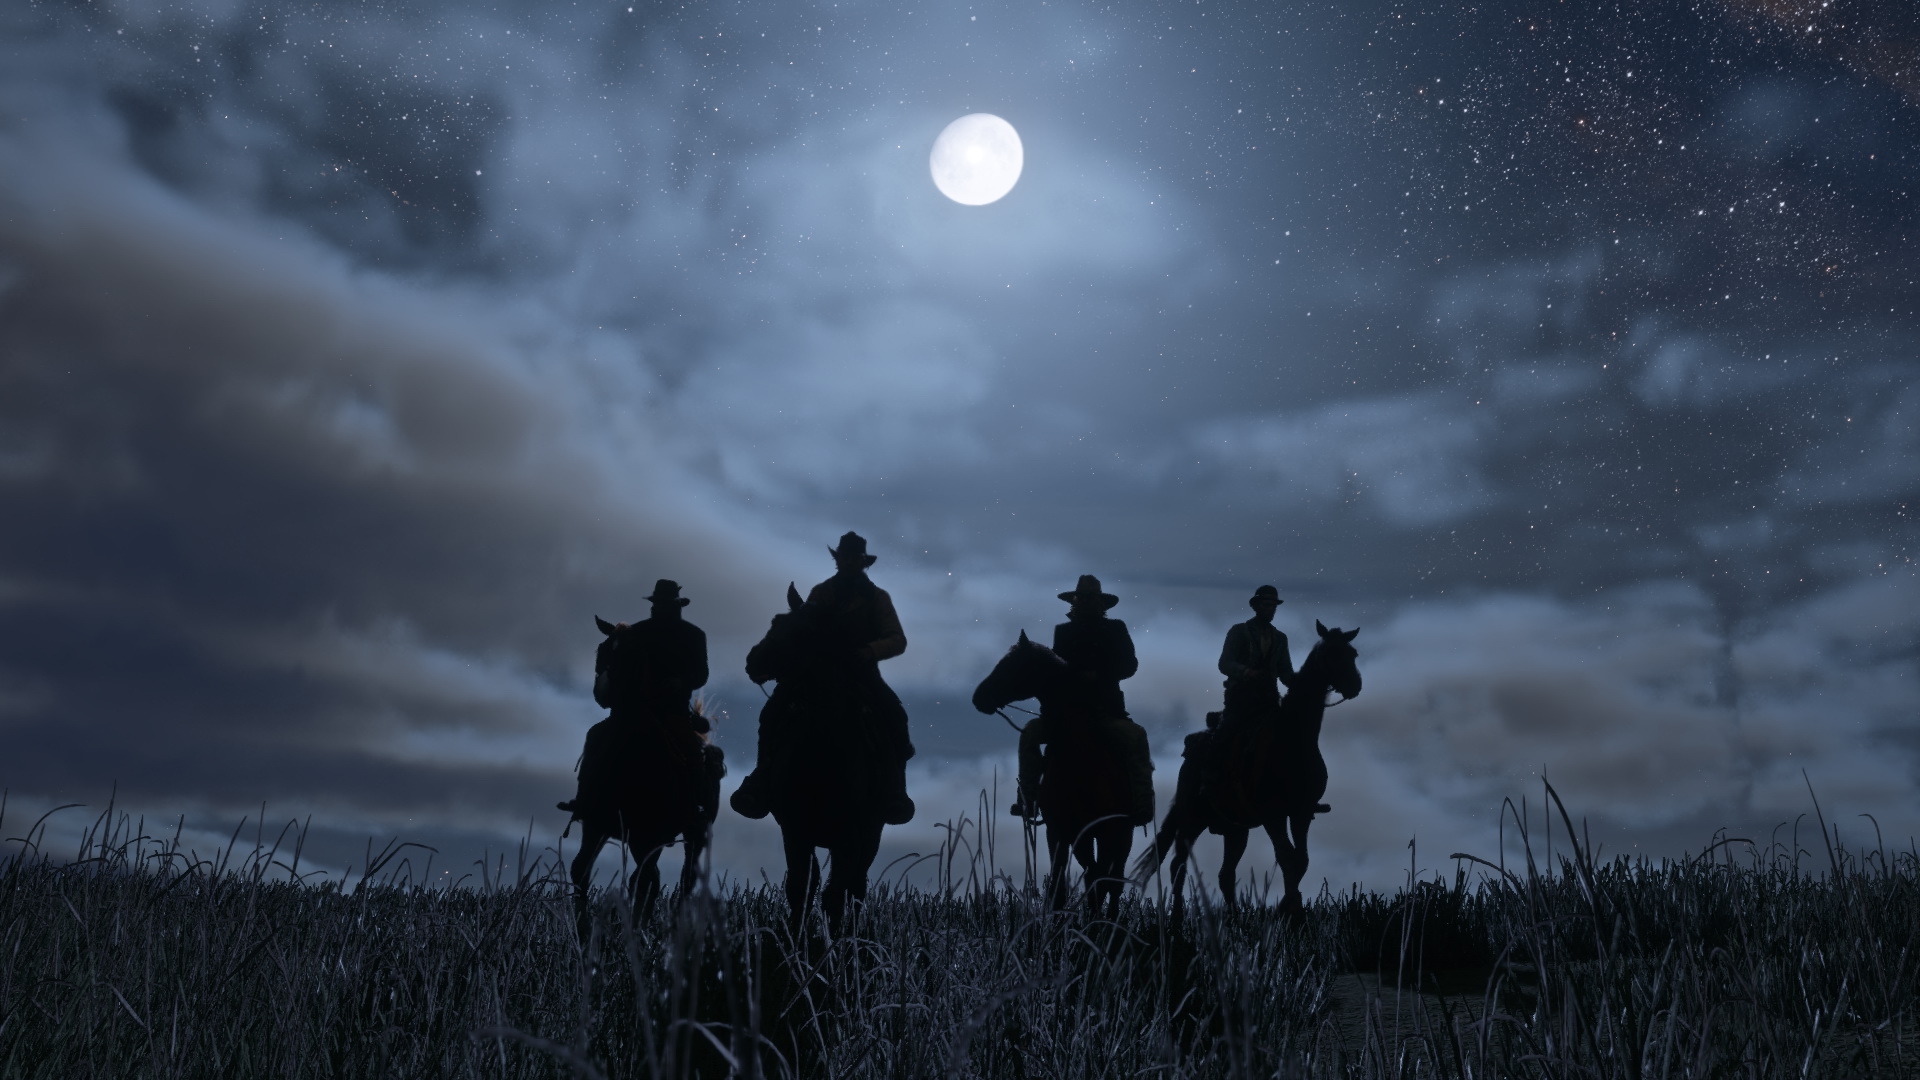 Why Red Dead Redemption 2 Lived Up To the Hype